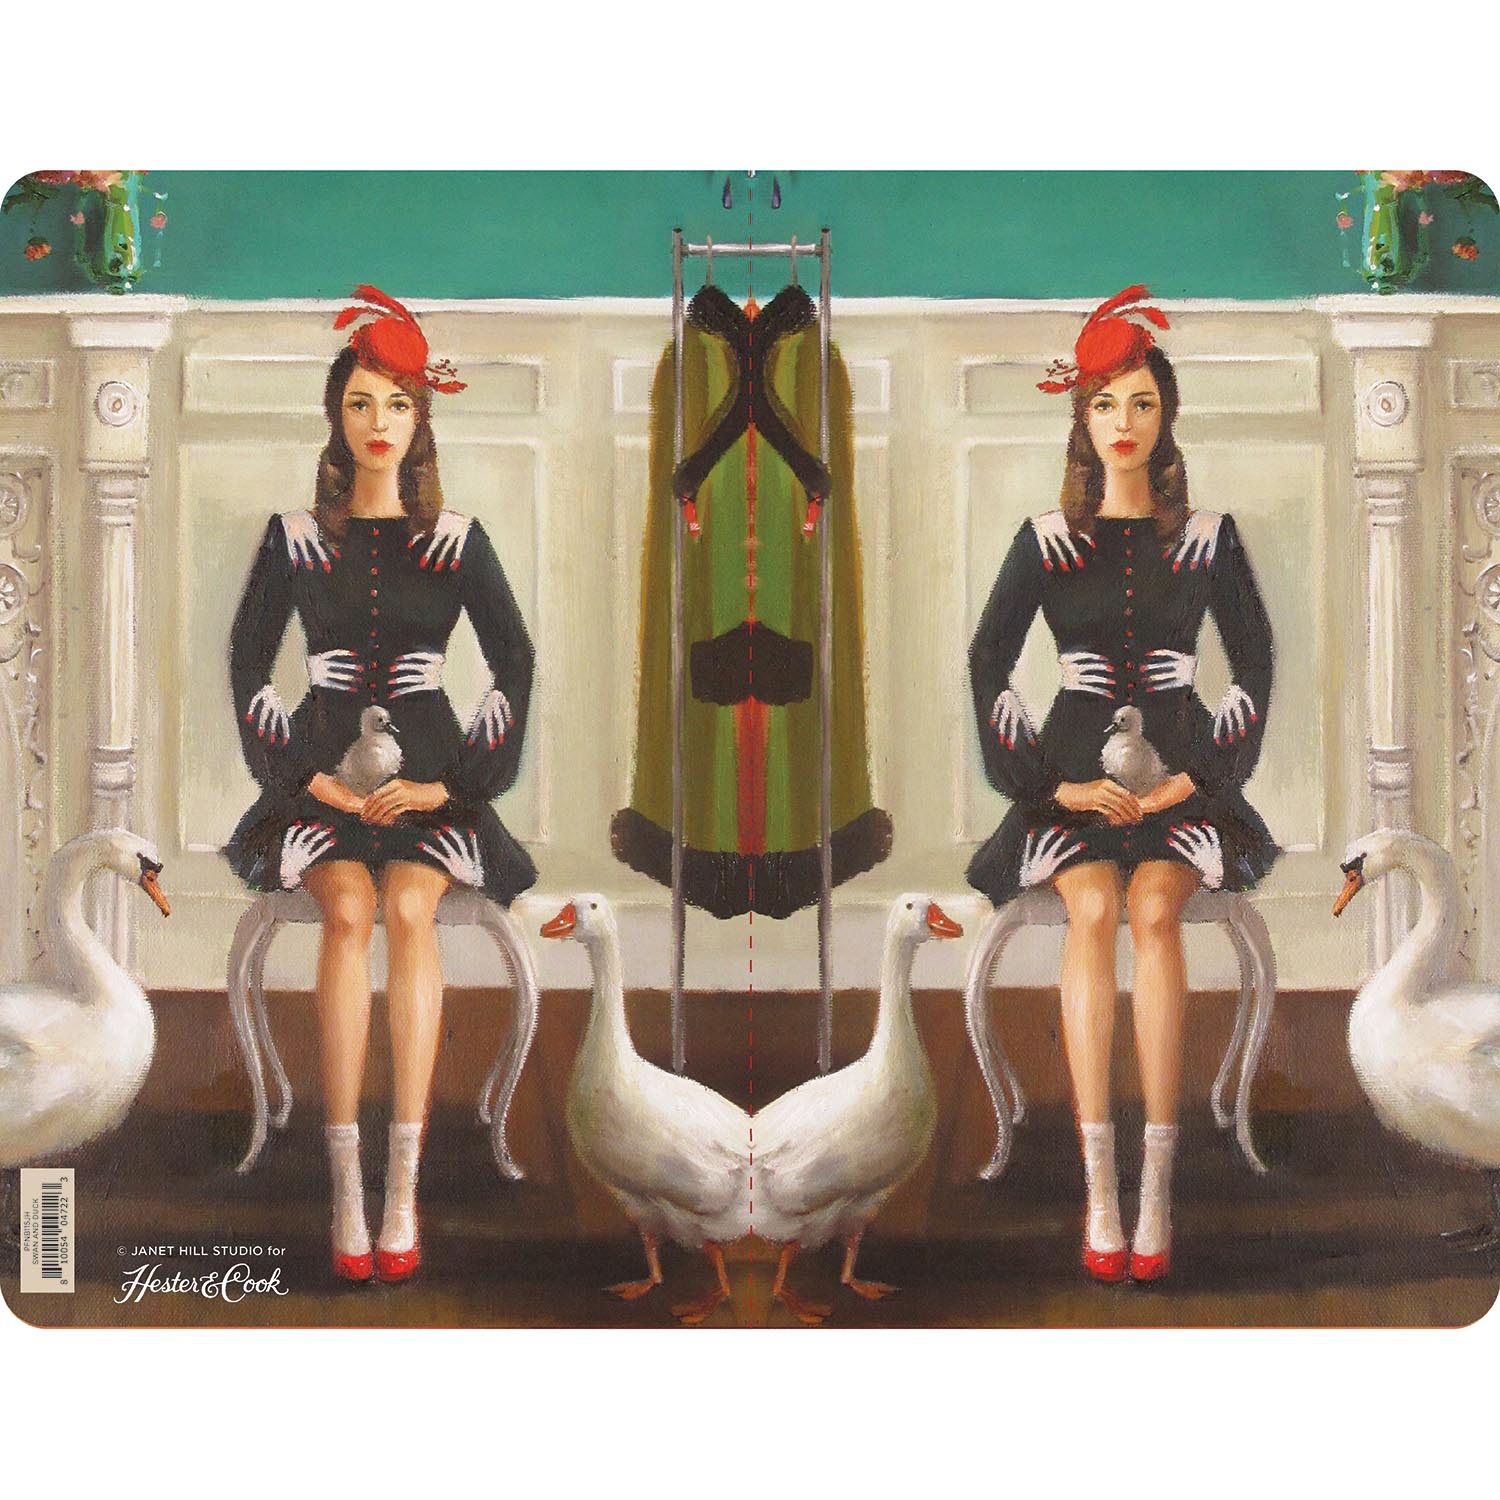 The open back and front covers of the Swan and Duck Notebook features the same artwork mirrored on both sides.